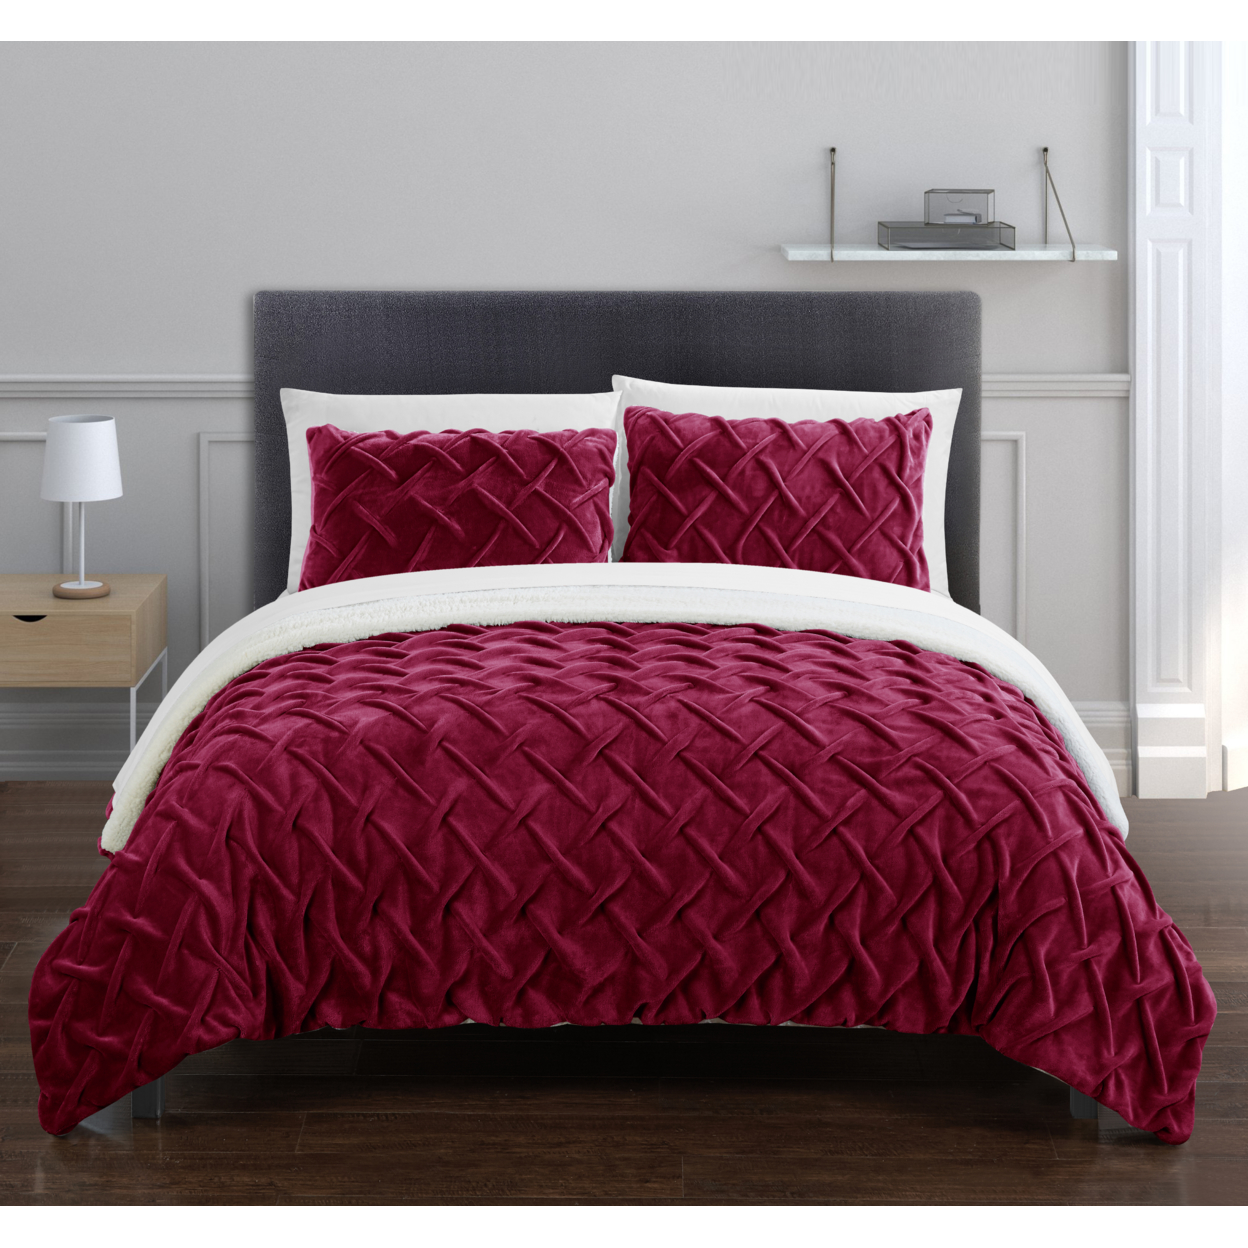 Thirsa 3 Or 2 Piece Comforter Set Ultra Plush Micro Mink Criss Cross Pinch Pleat Sherpa Lined Bedding - Red, King